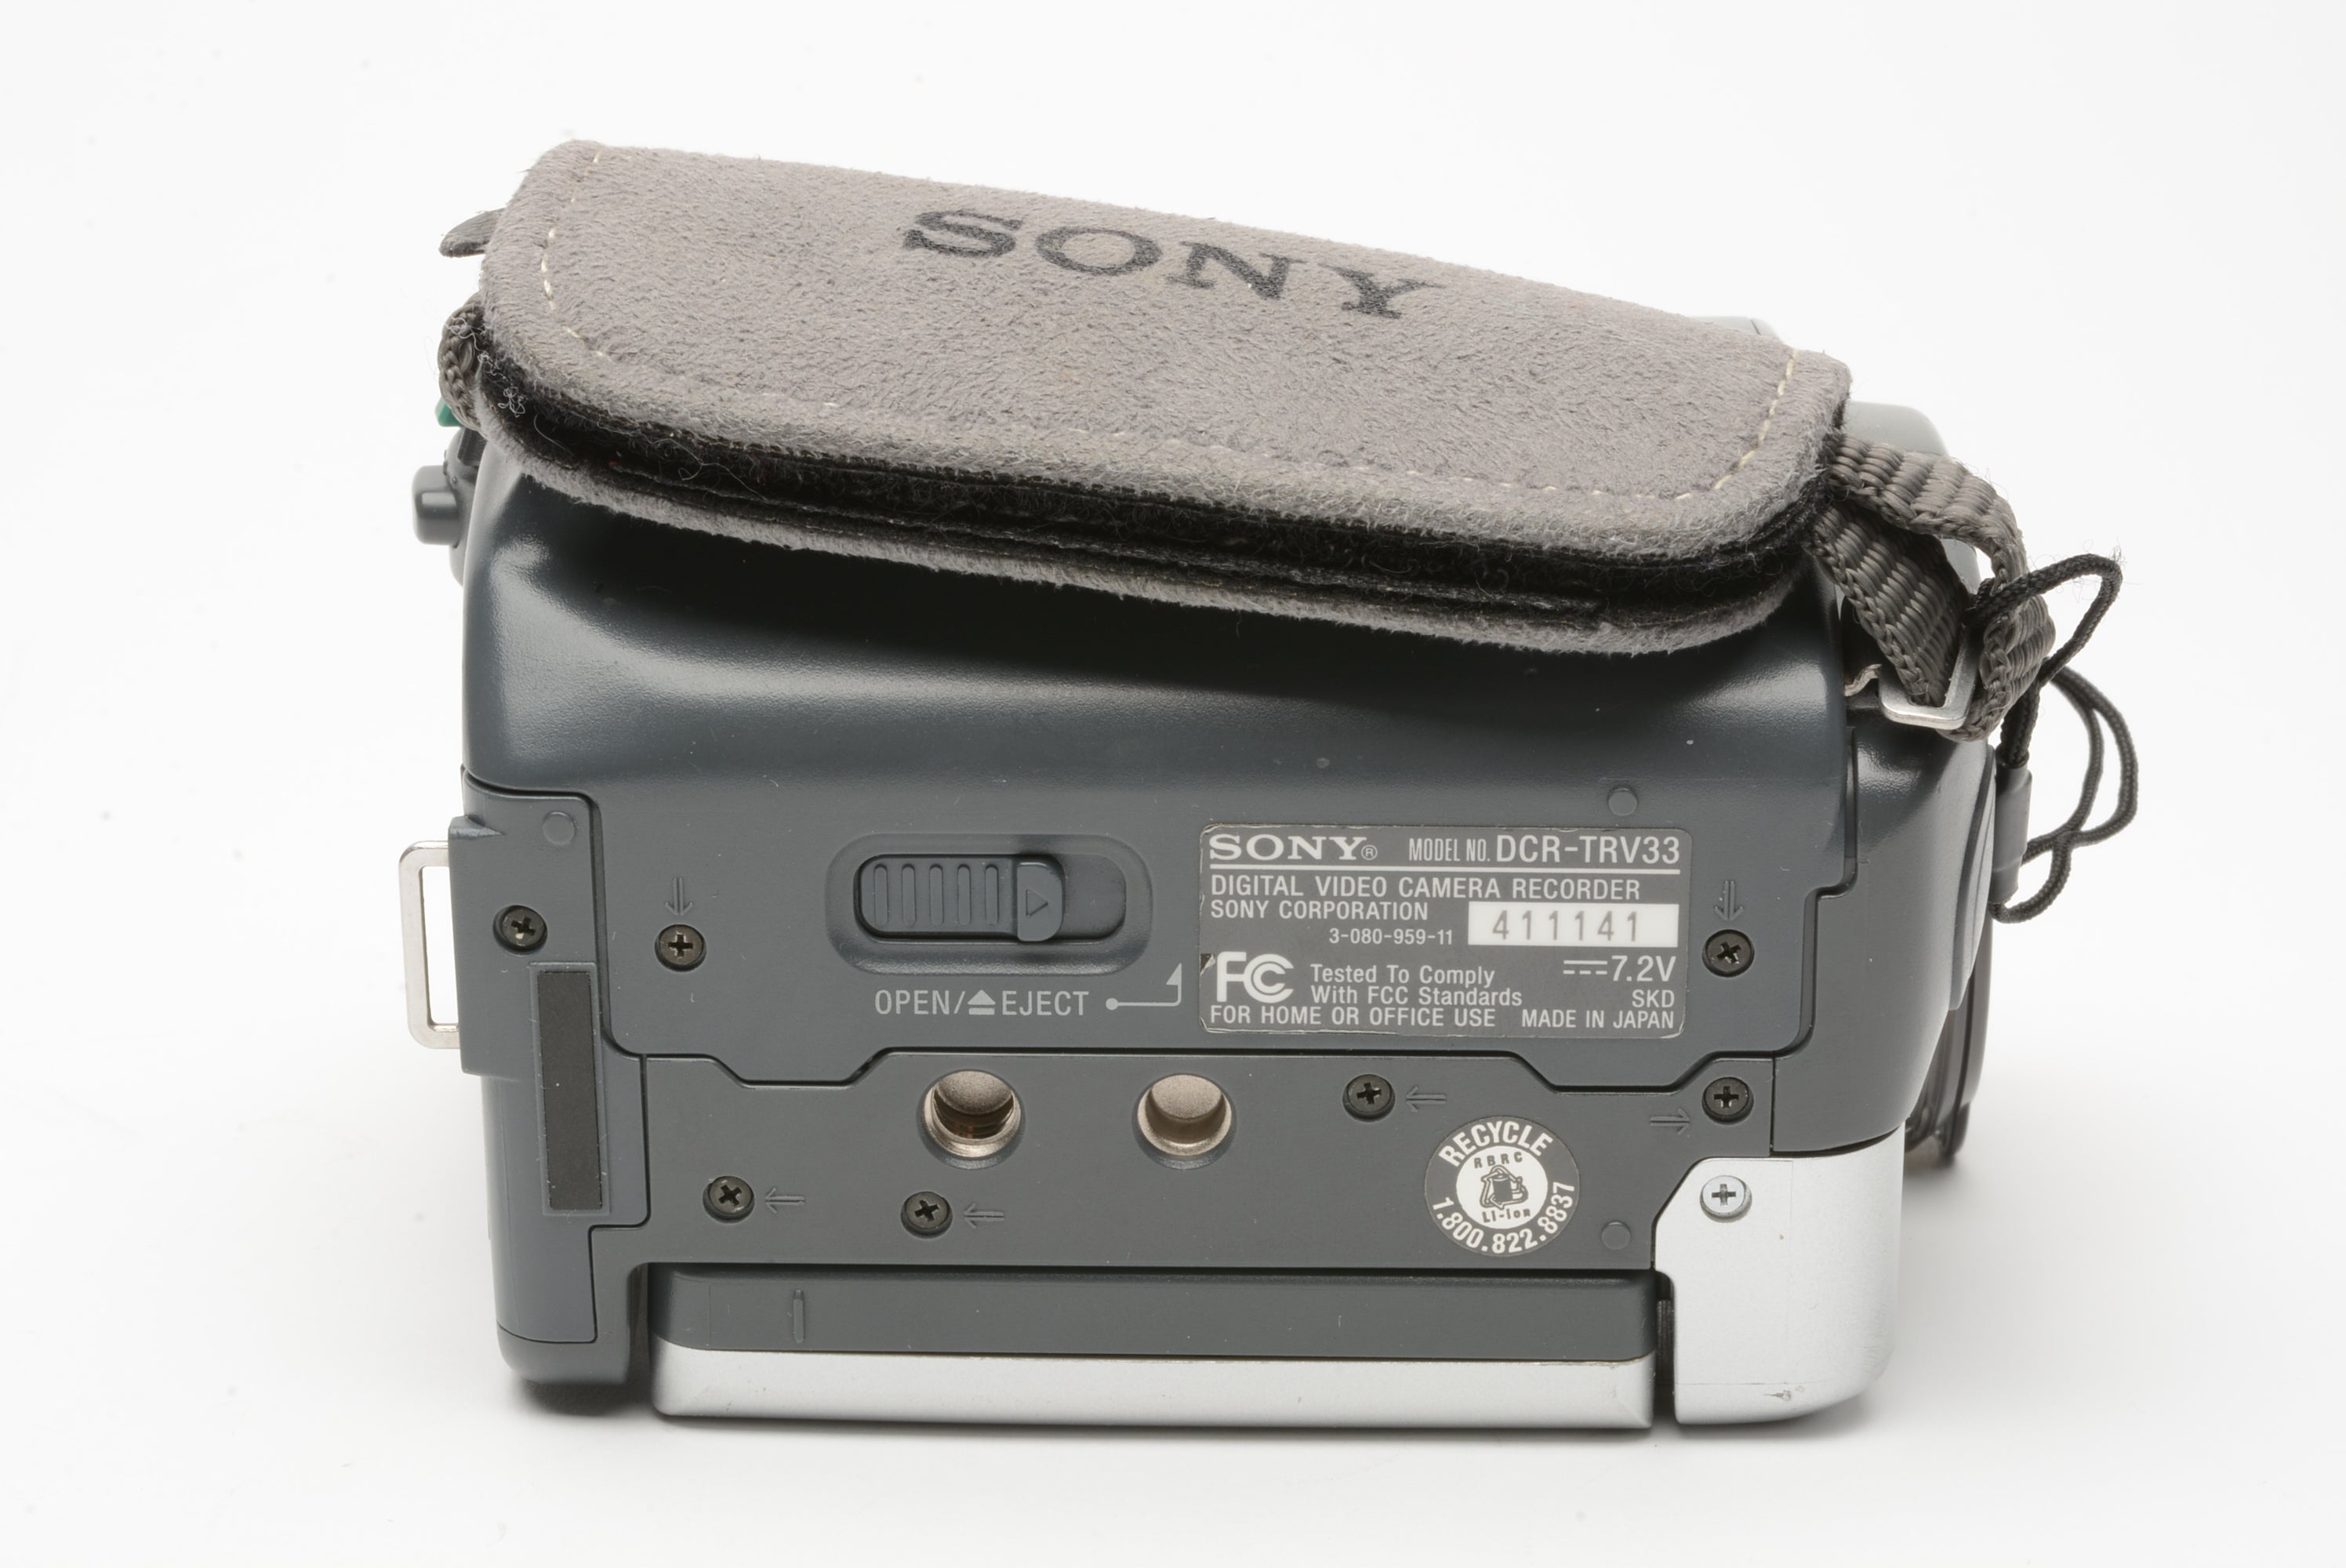 Sony DCR-TRV33 Mini DV Camcorder, 2batts, charger, remote, tested, great!